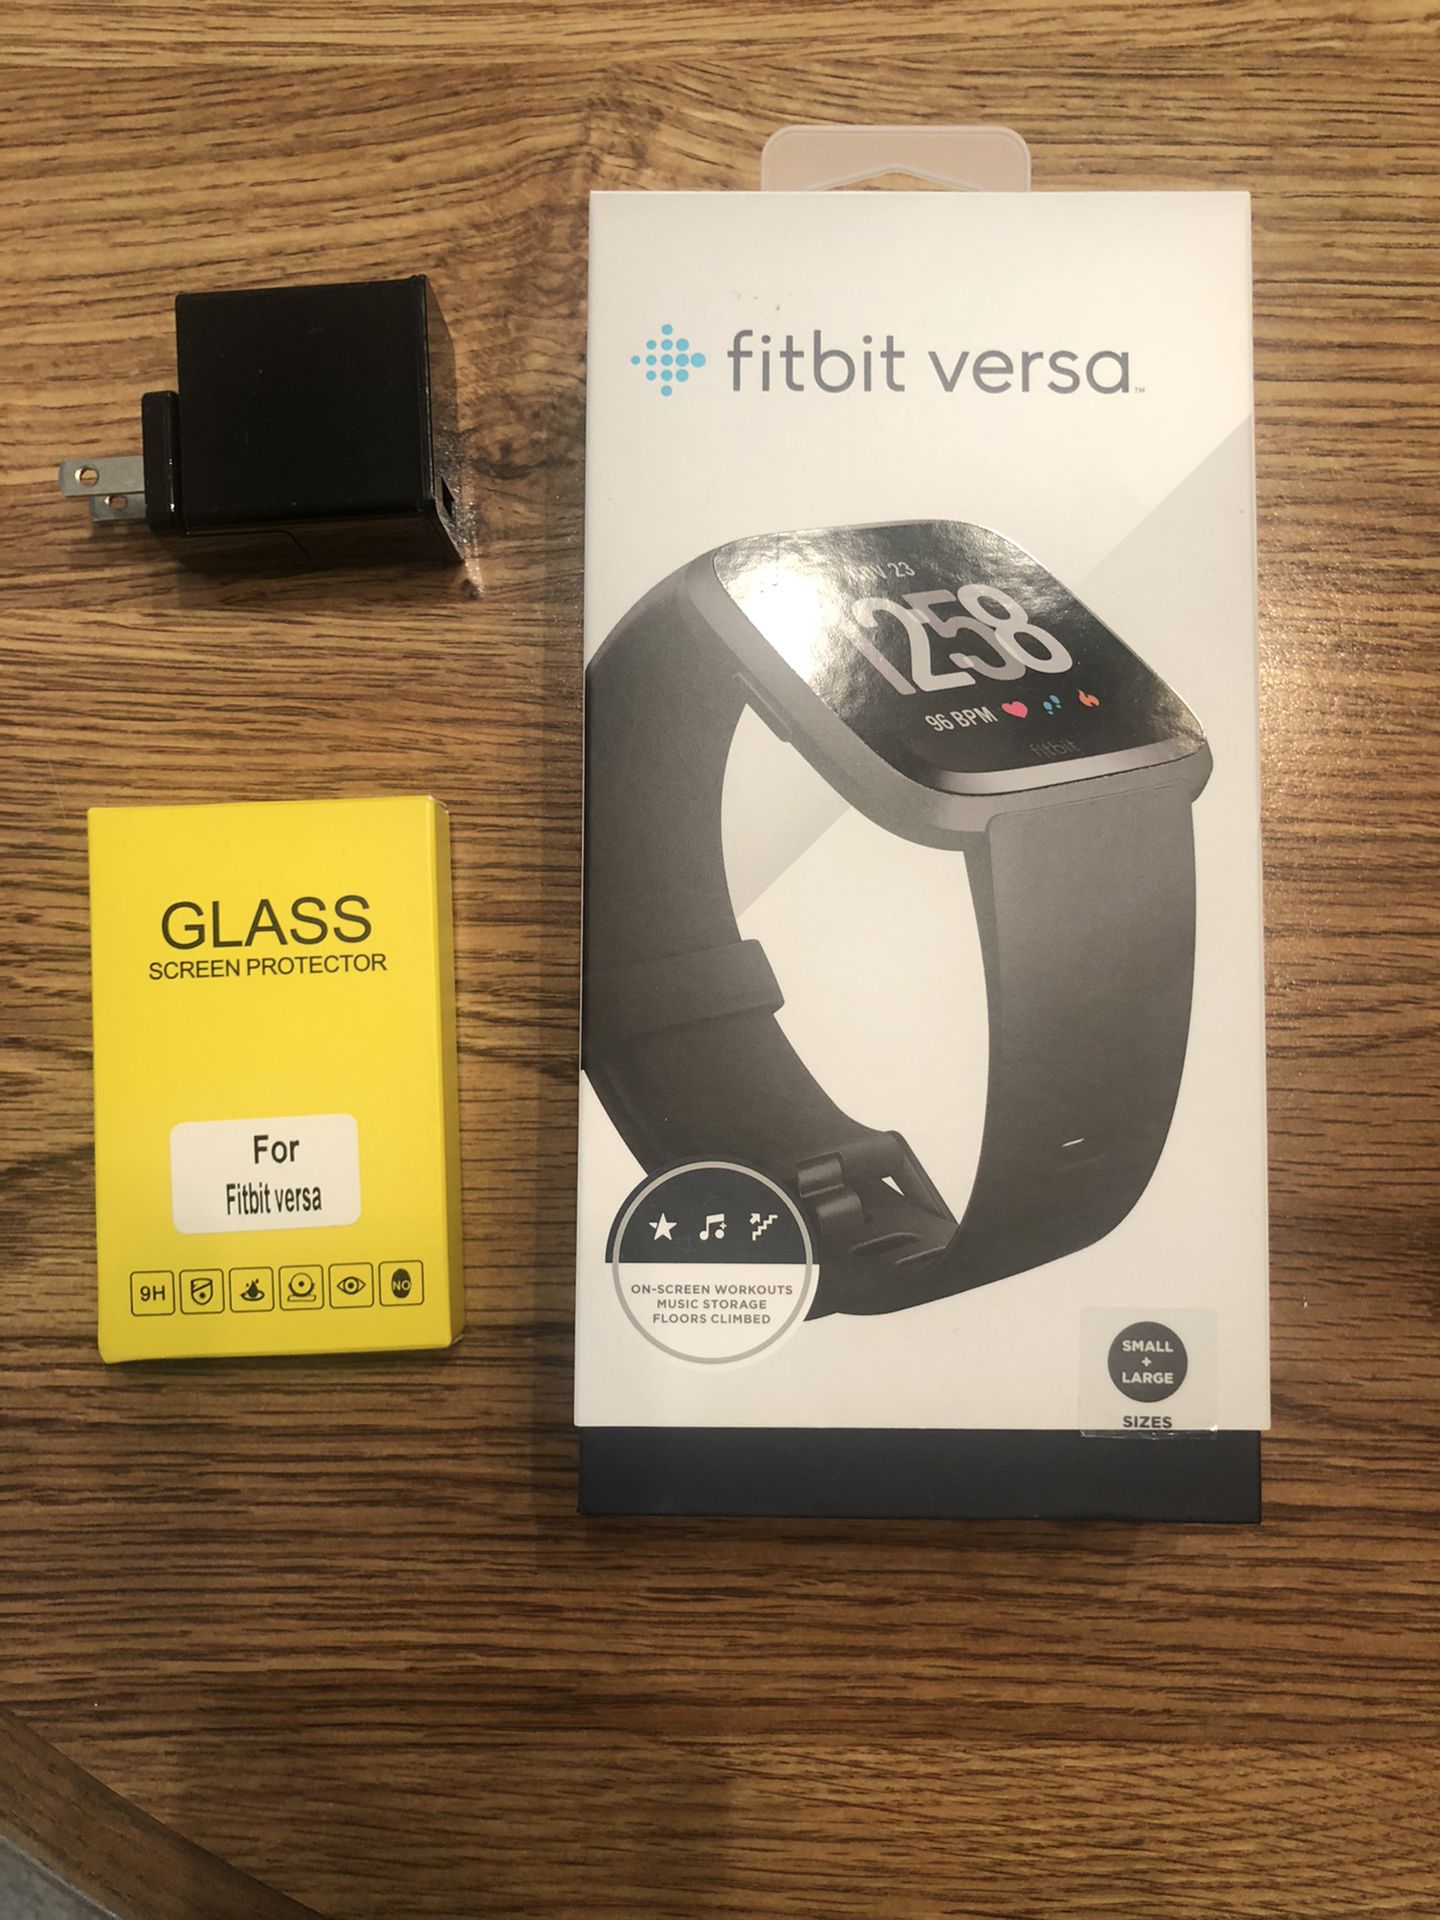 Fitbit Versa Very Good Conditions